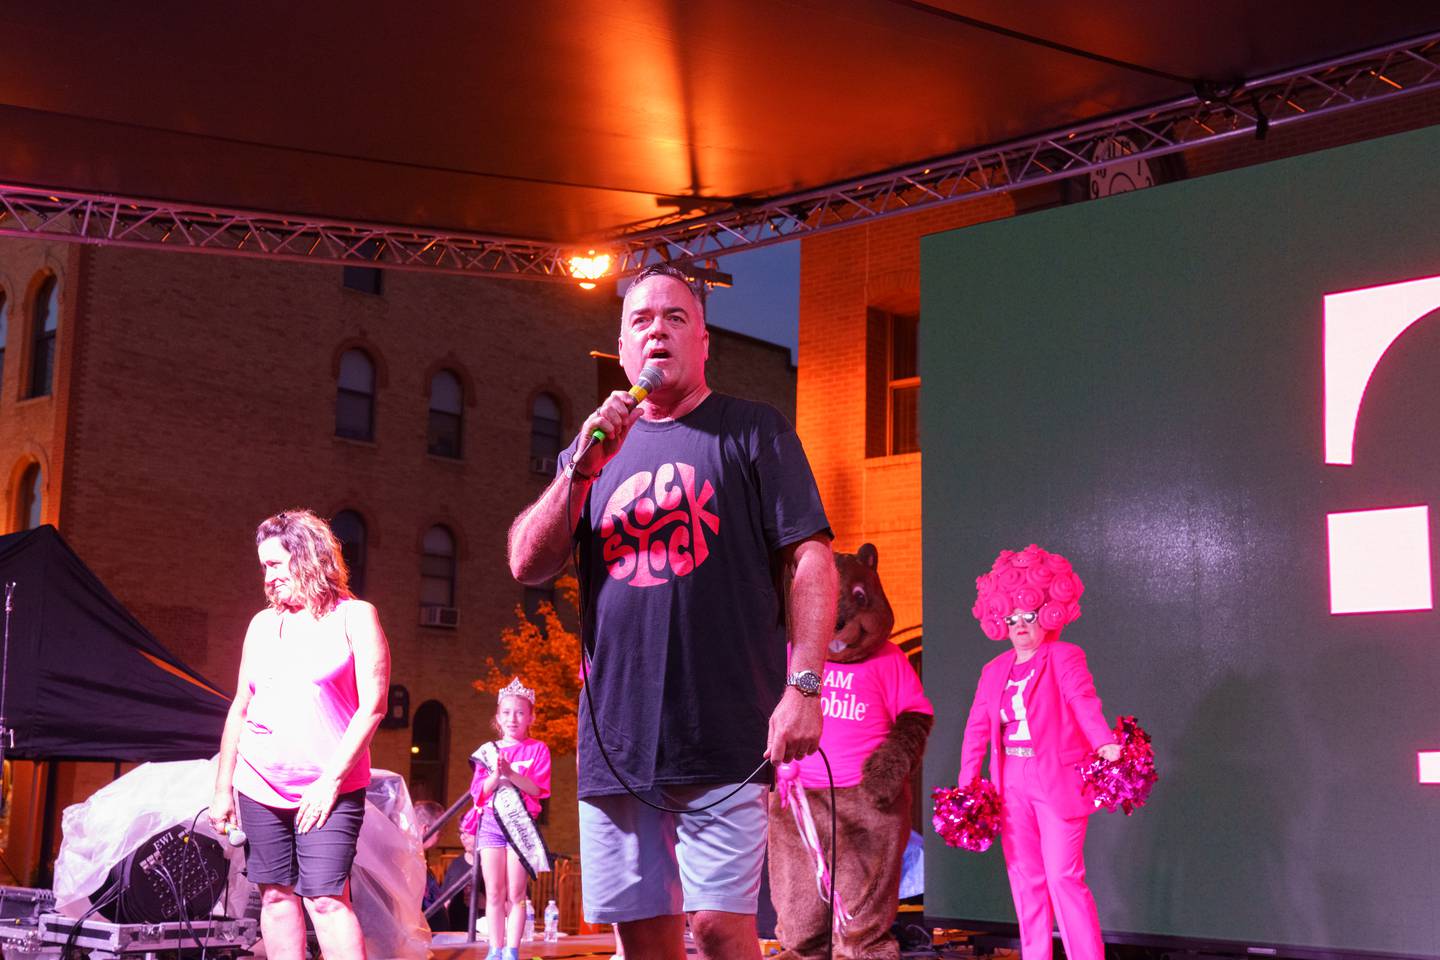 Woodstock Mayor Mike Turner on stage during the Rockstock concert event in downtown Woodstock on Saturday, Aug. 28, 2021, to help announce the city will receive $3 million in prizes from T-Mobile as the top winner of an inaugural grant contest held by the company.